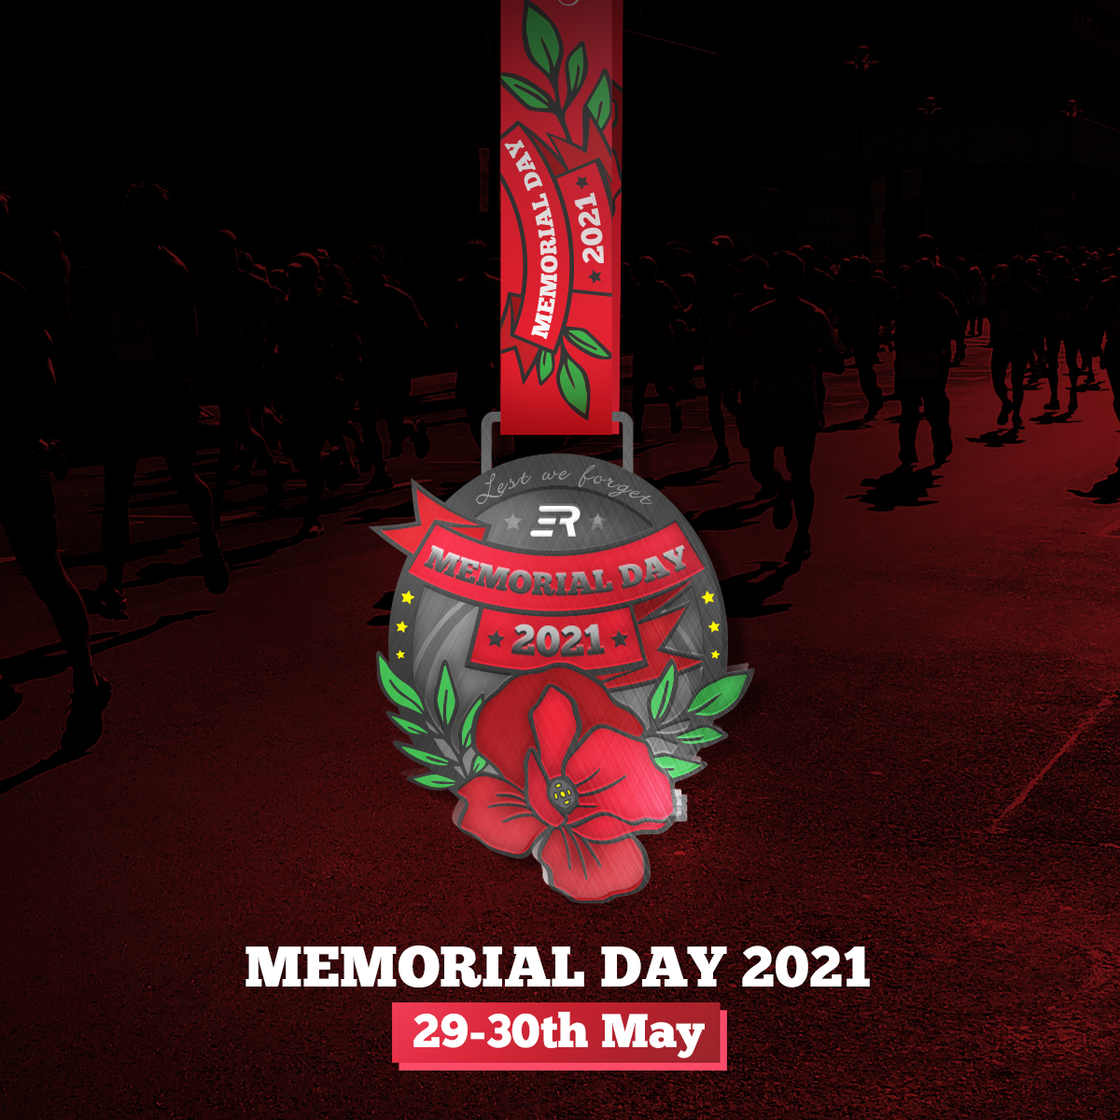 SPECIAL OFFER: Stunning Medal + Official T-Shirt | Memorial Day Marathon 2021 | May 29-30th